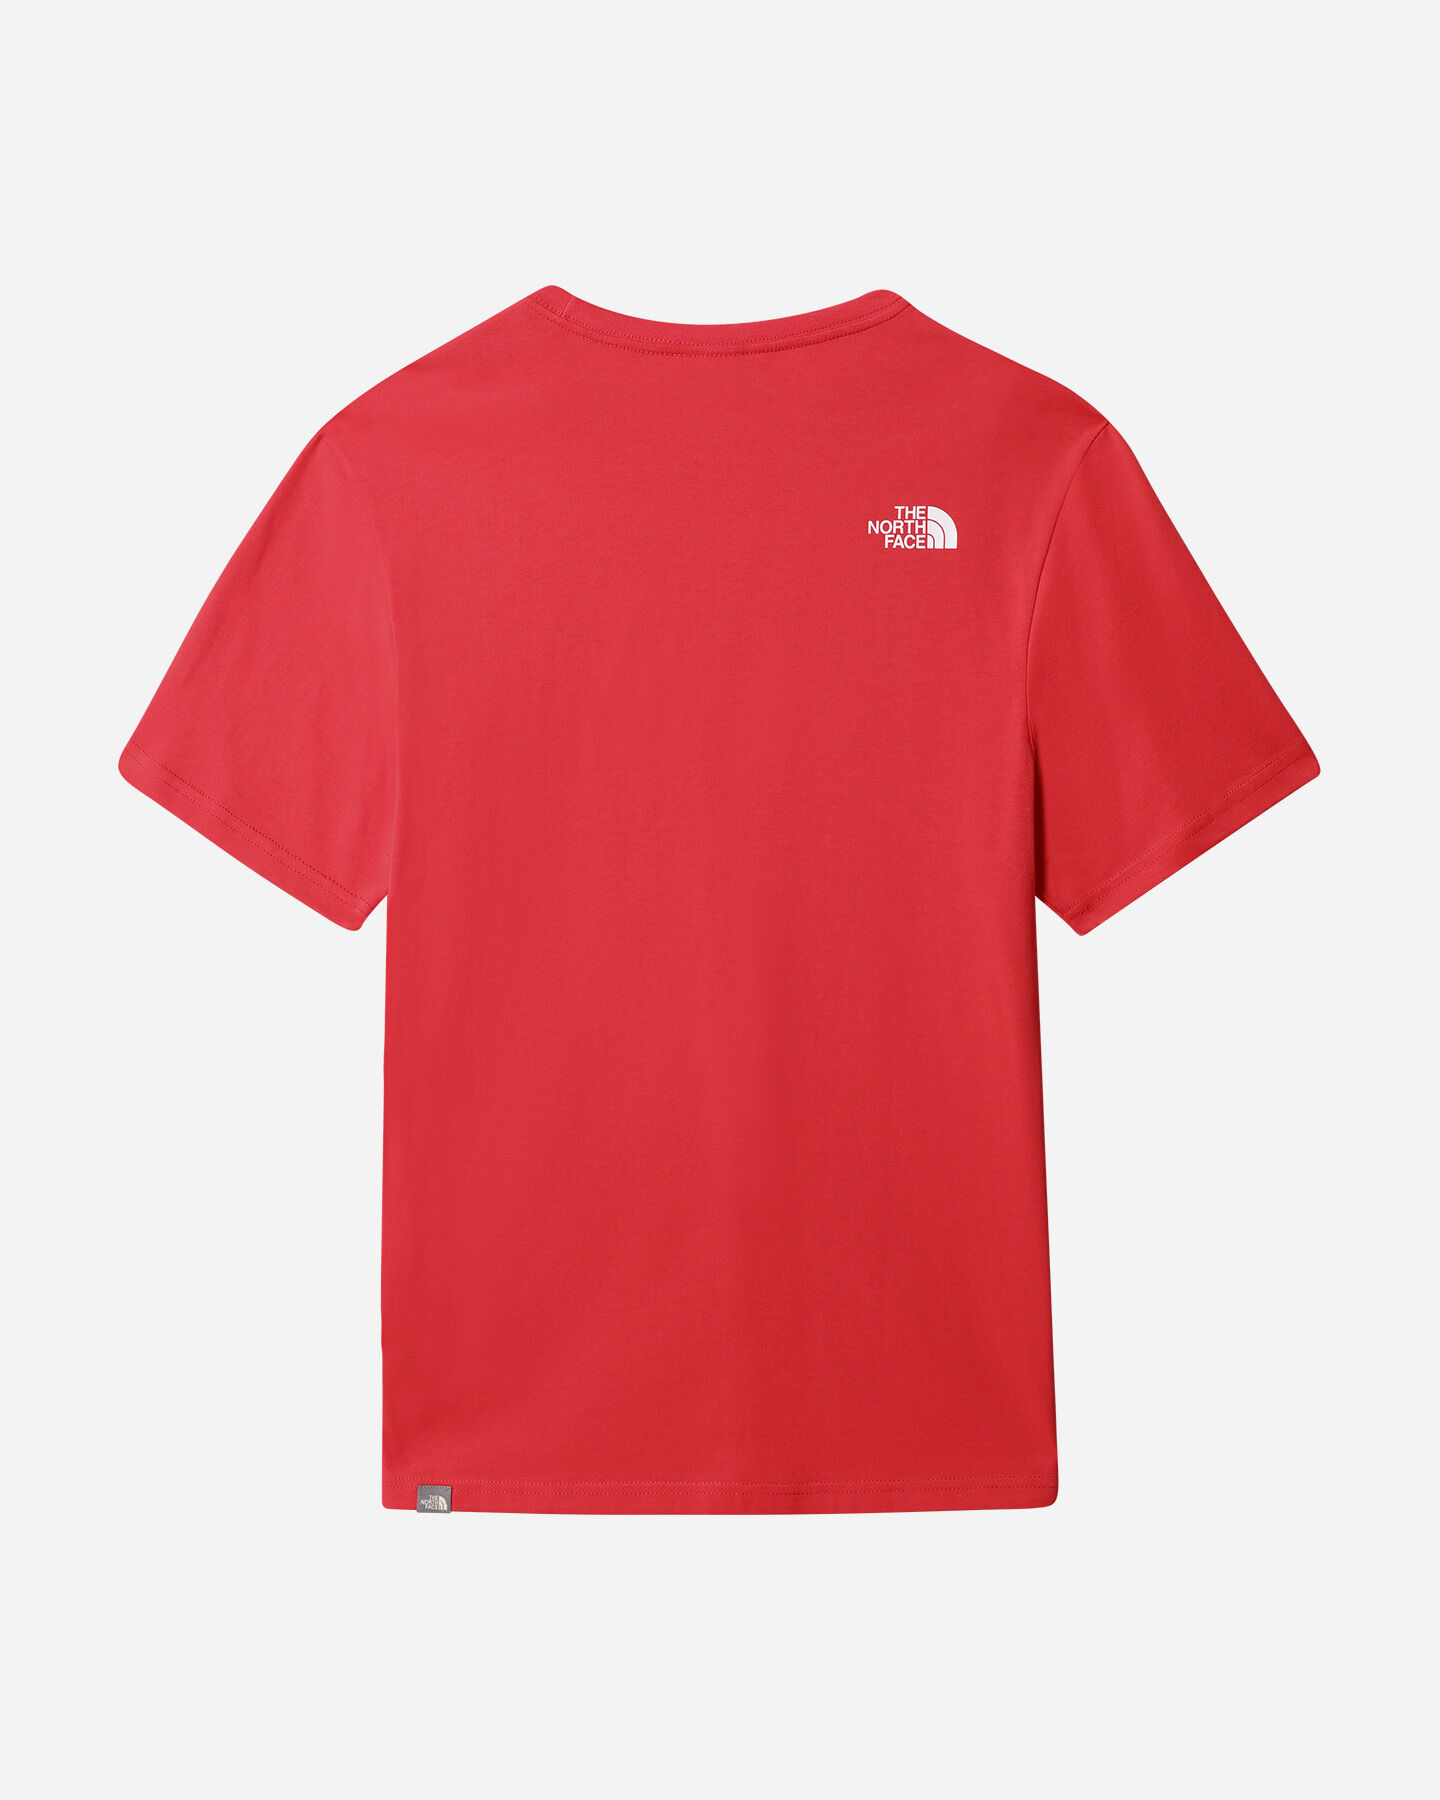  T-Shirt THE NORTH FACE EASY BIG LOGO M S5421999|V33|S scatto 1